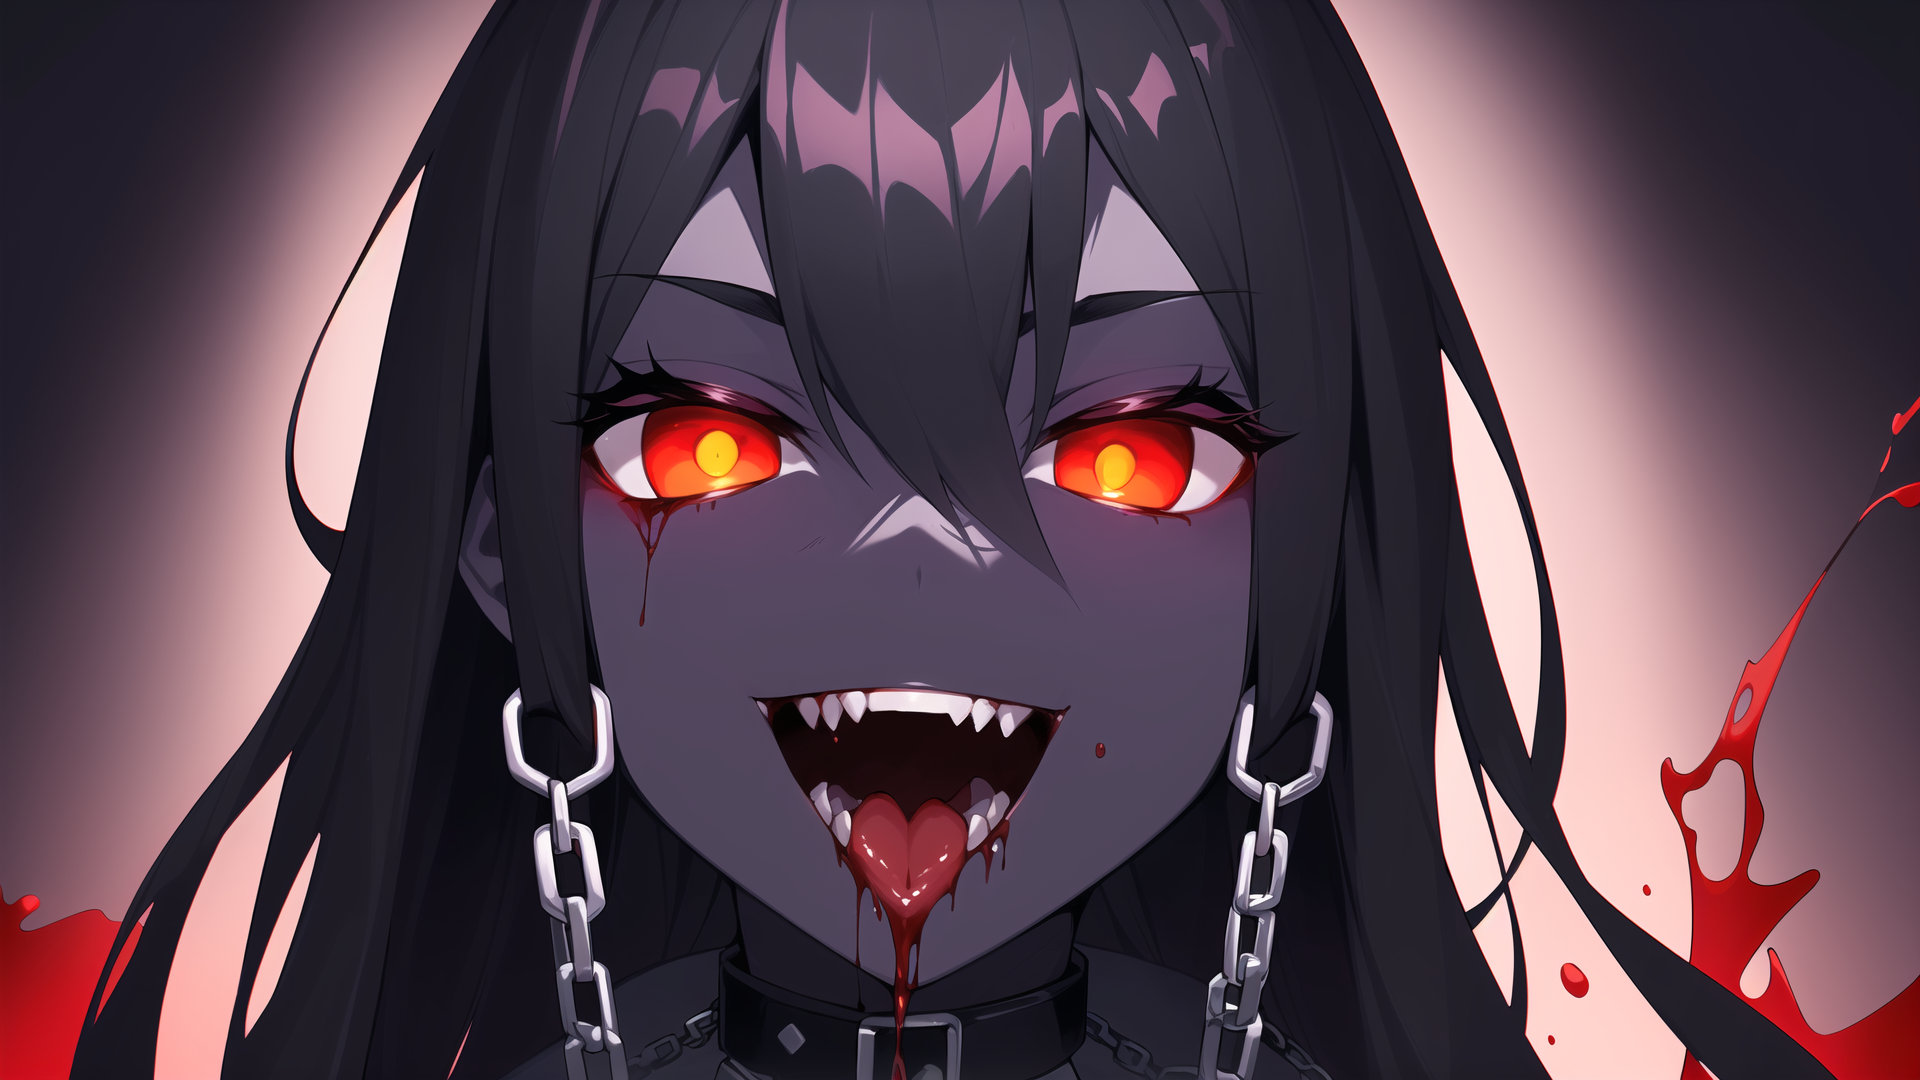 Anime Chained Blood Horror Girl 9 By I-Lovefantasy On Deviantart